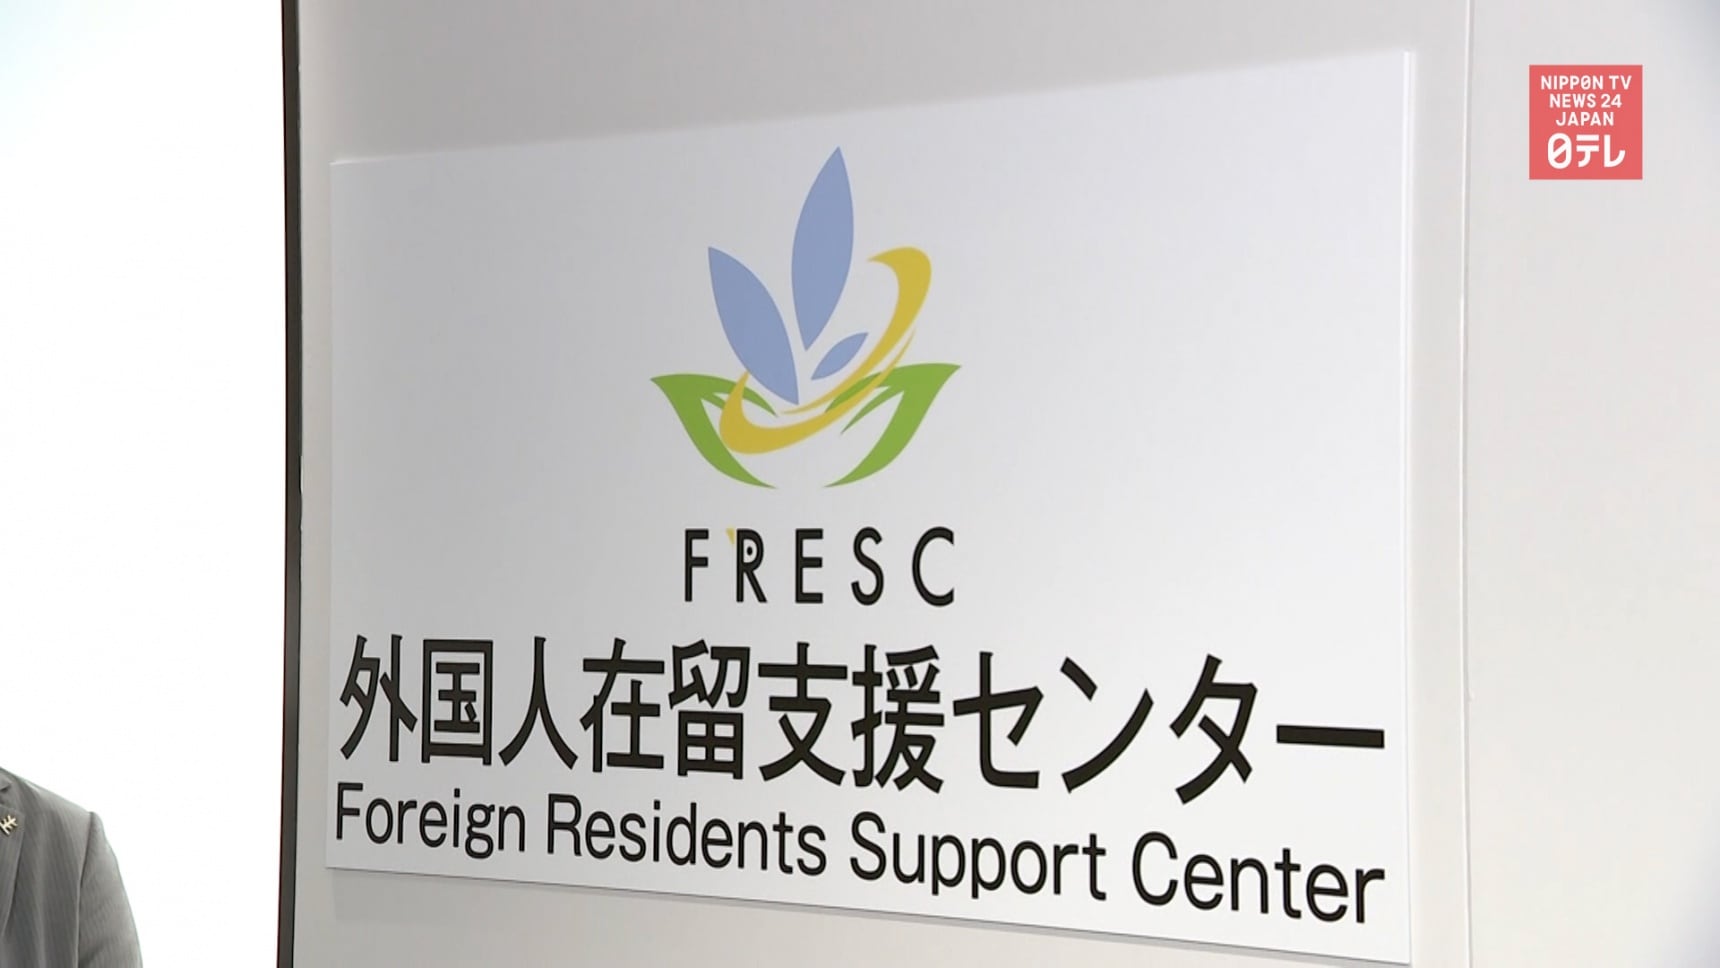 Tokyo's New Foreign Residents Support Center